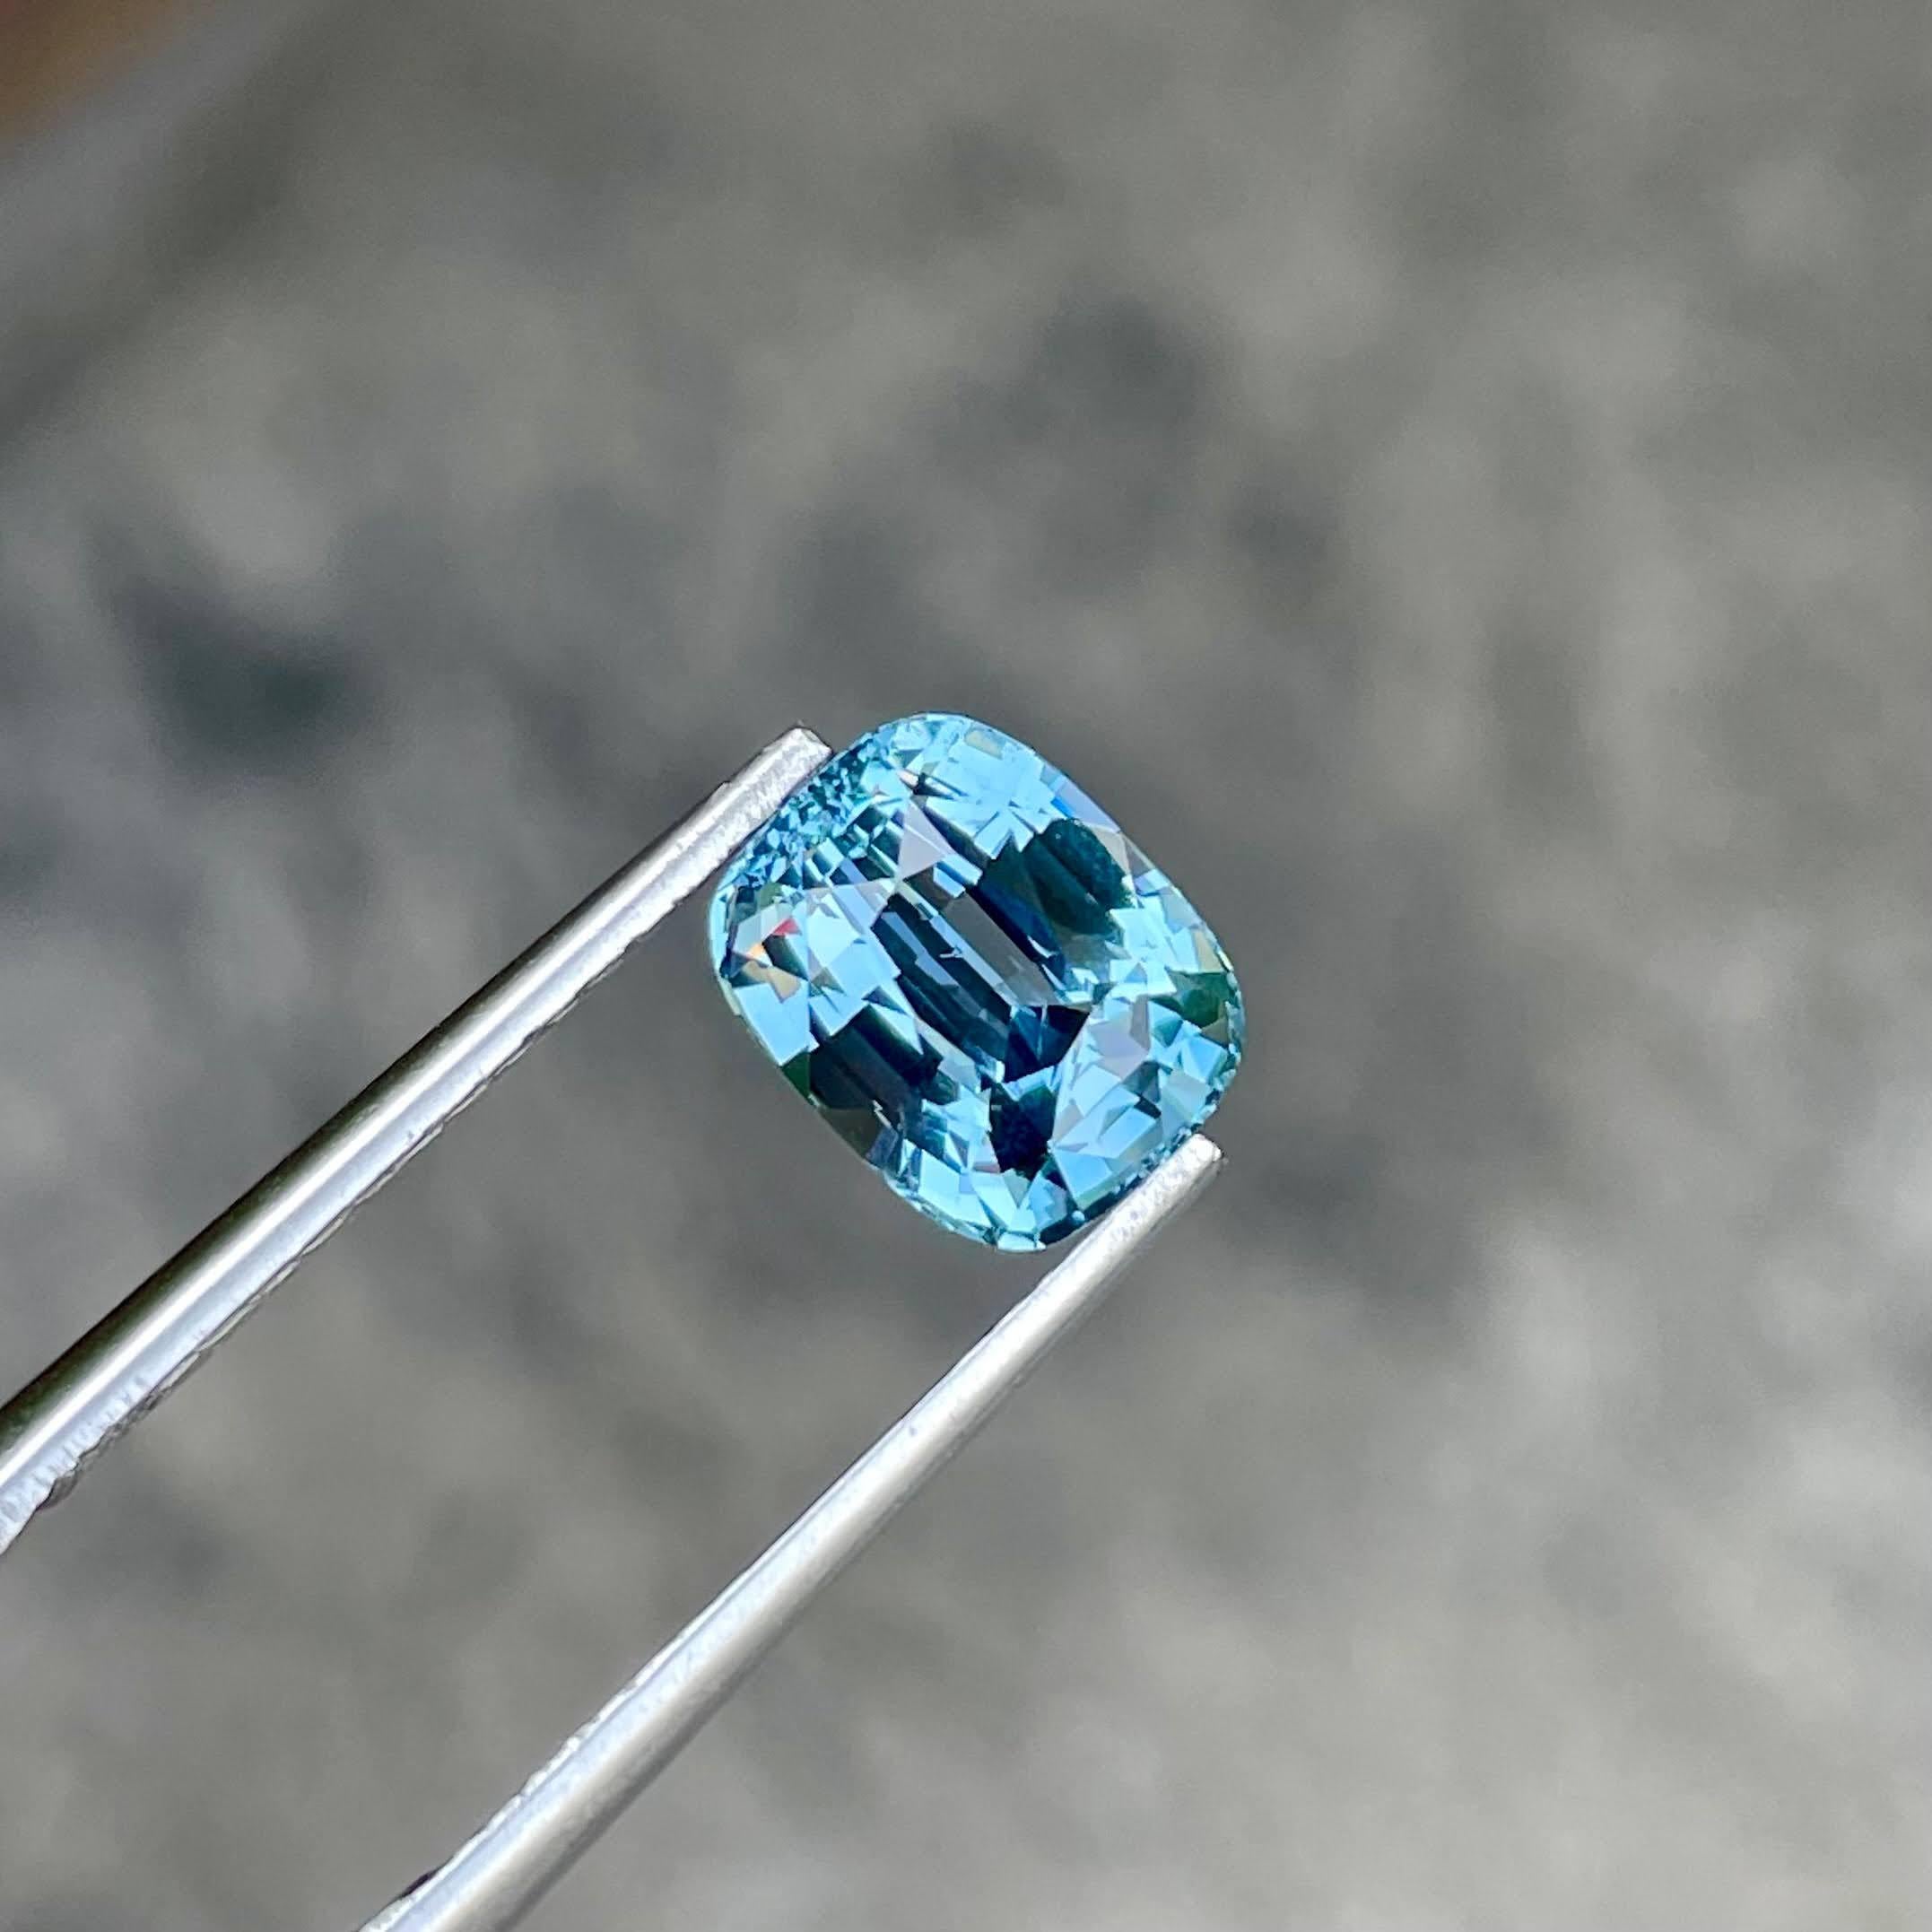 Women's or Men's 2.55 Carats Vivid Blue Loose Spinel Stone Cushion Cut Natural Tanzanian Gemstone For Sale